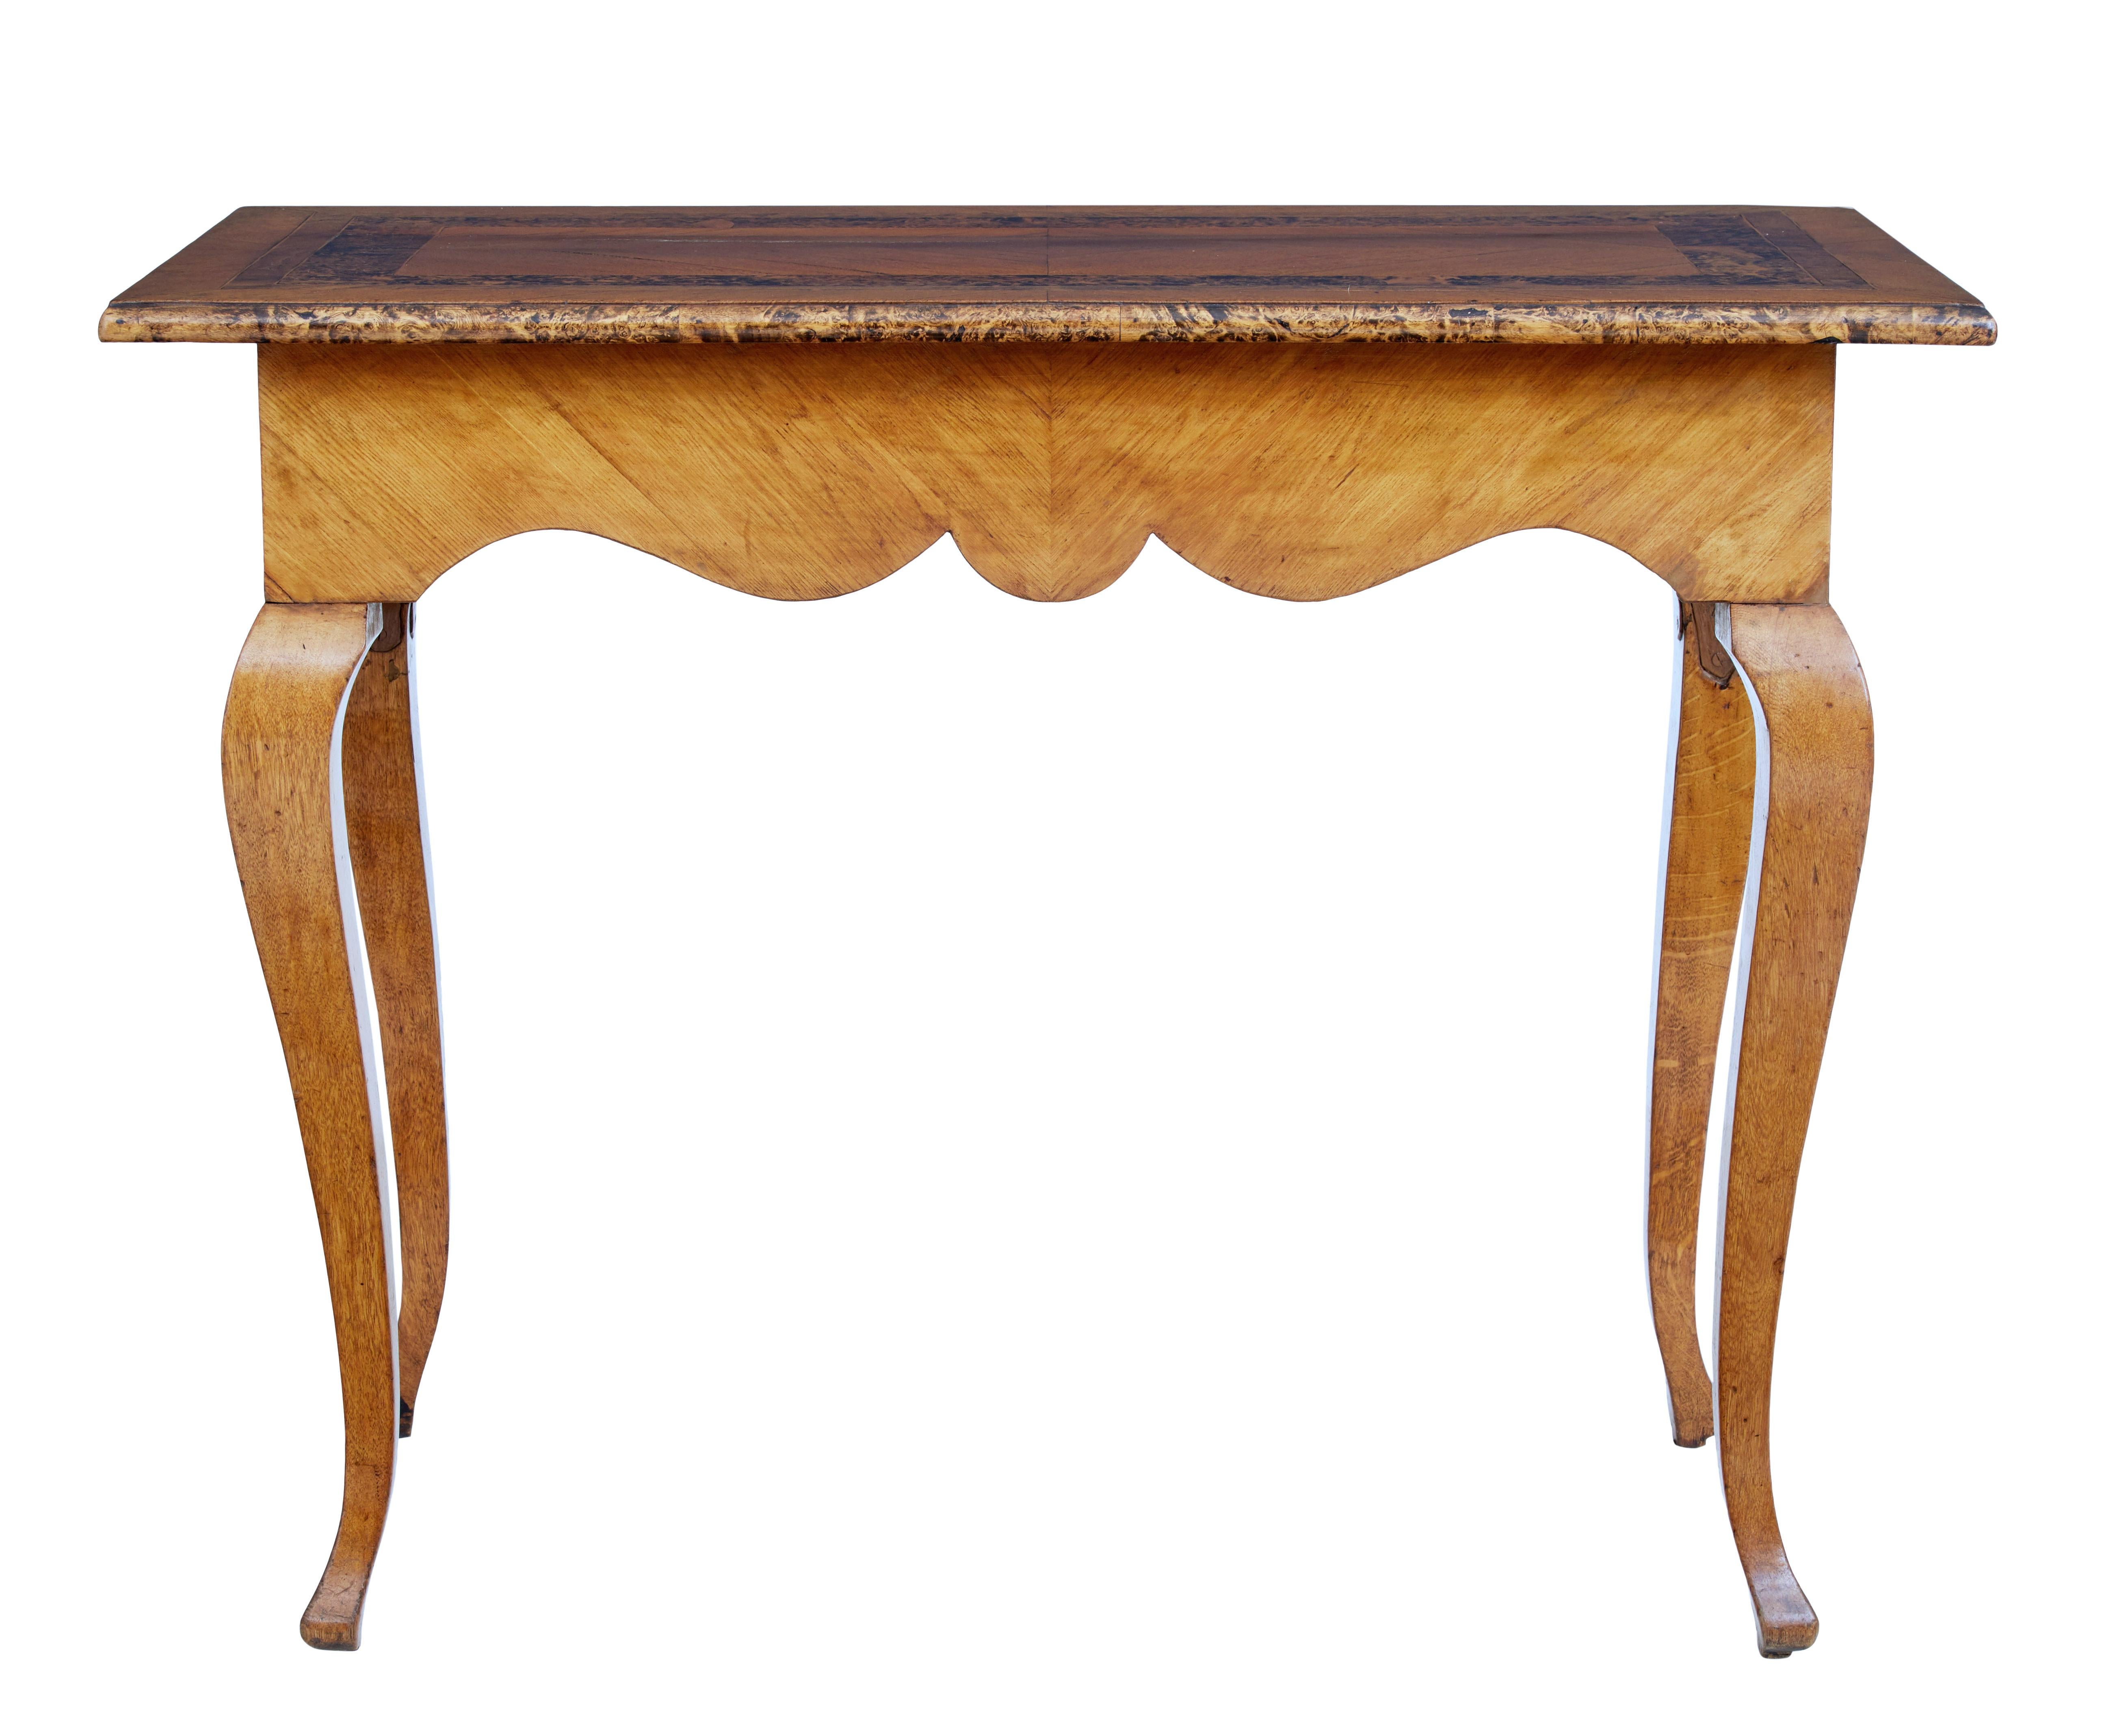 Swedish mid 19th century alder root occasional table, circa 1850.

Elegant piece of mid 19th century furniture from Sweden. Over sailing top with alder root outer edge and alder cross banding with stringing. Rare feature of having a drawer each